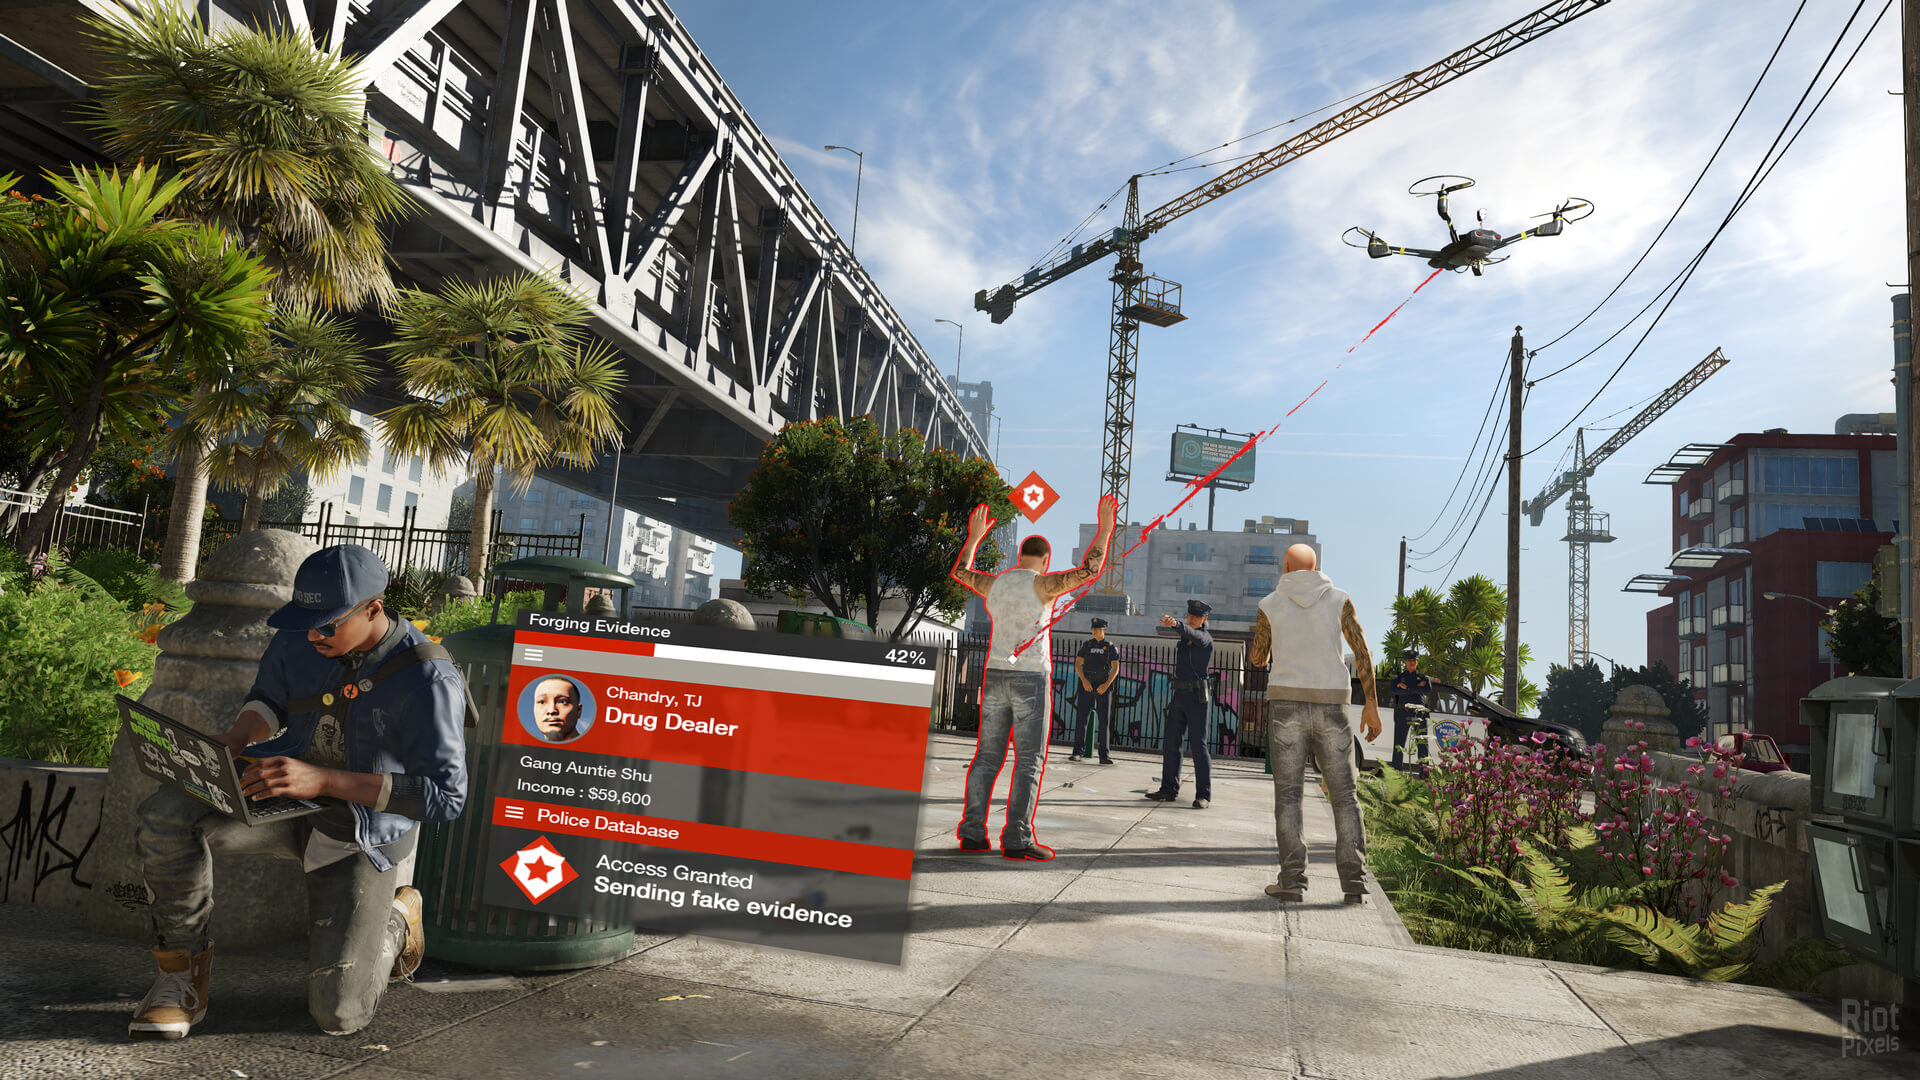 DOWNLOAD WATCH DOGS 2 FULL GAME HIGHLY COMPRESSED FOR PC - TRAX GAMING CENTER